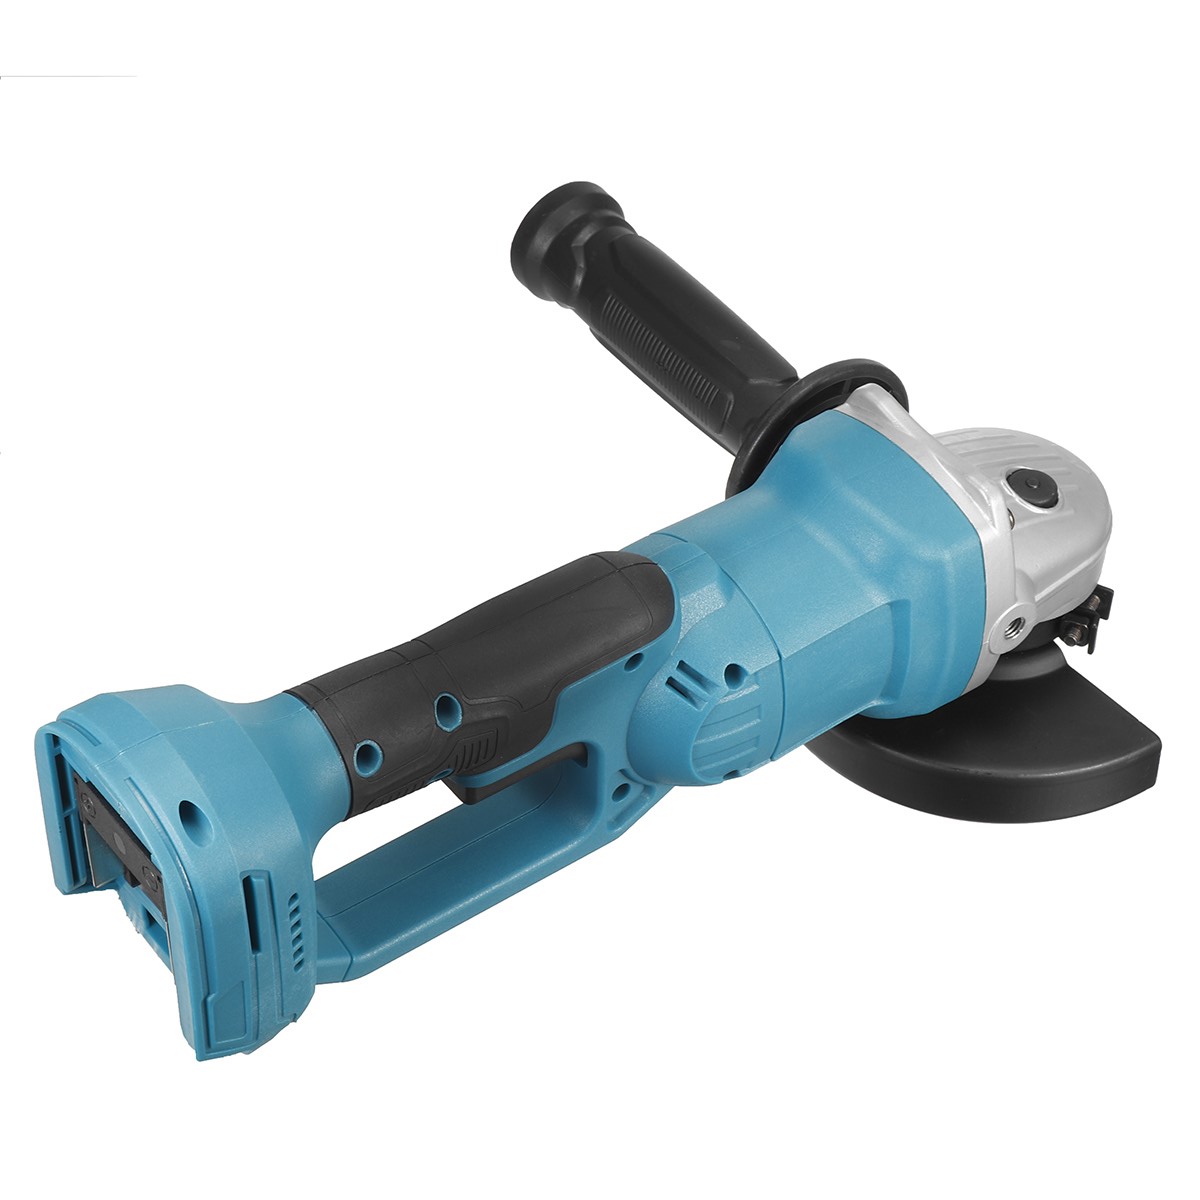 125mm-18V-Brushless-Electric-Angle-Grinder-Portable-Grinding-Polishing-Cutting-Tool-W-None12-Battery-1866803-4